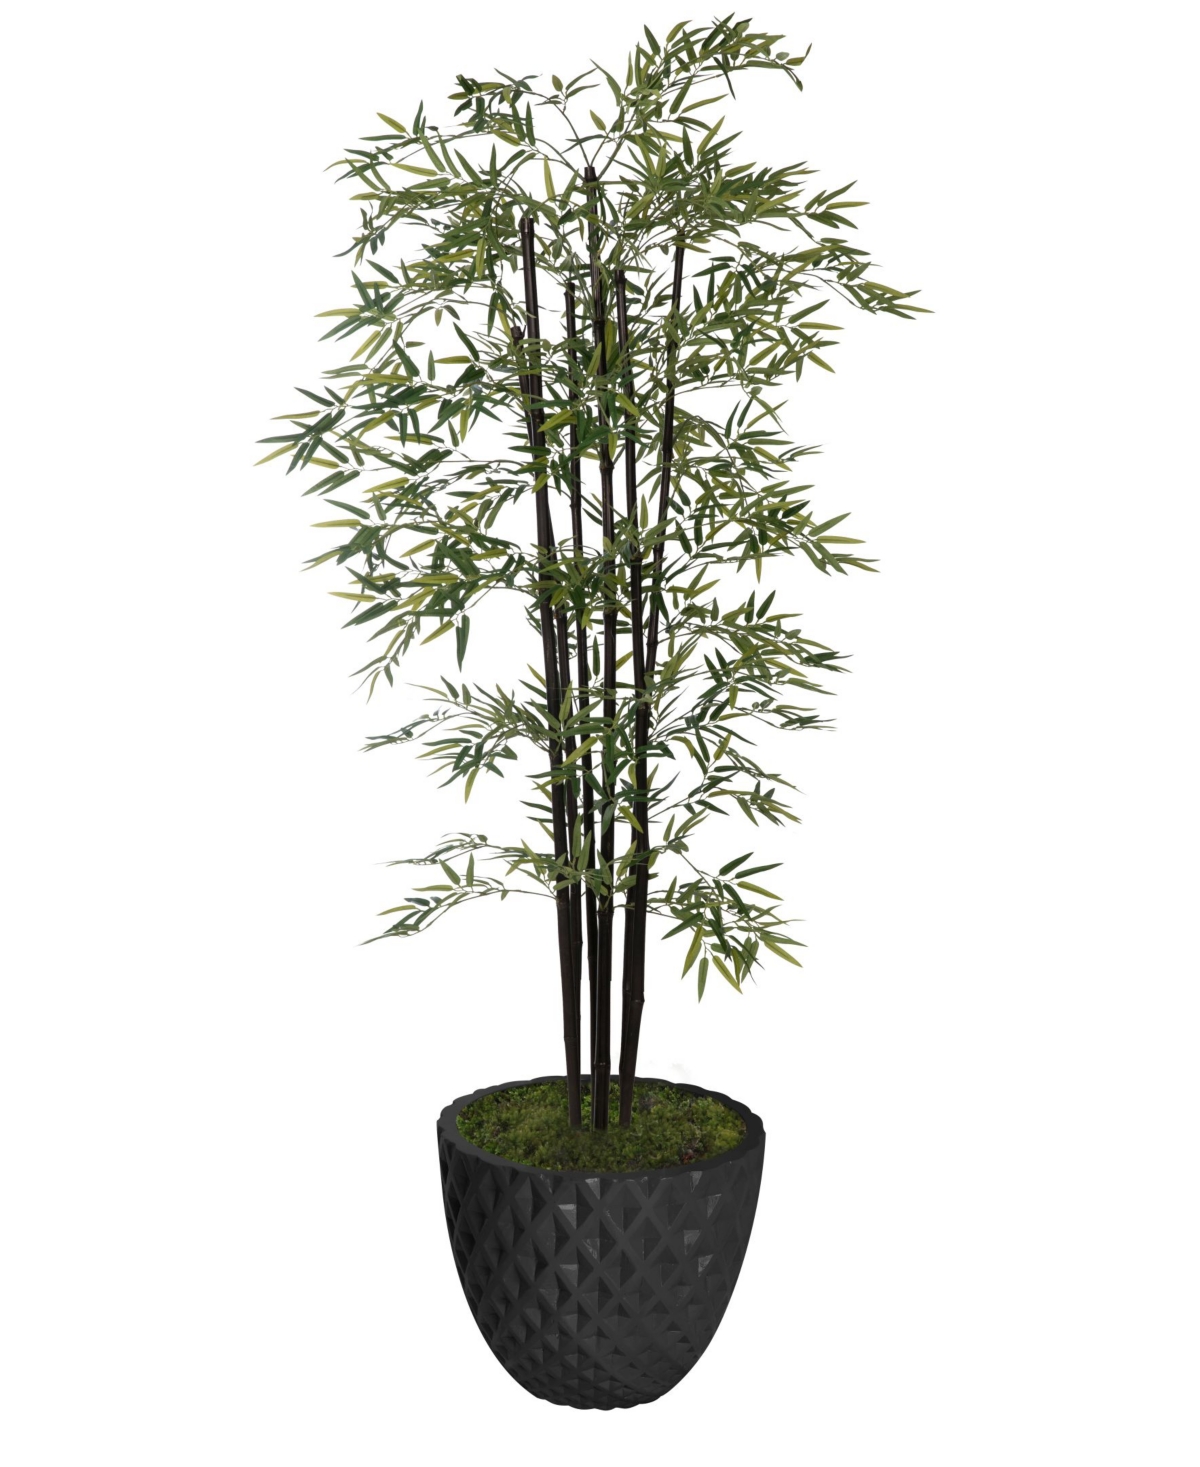 77.6" Tall Bamboo Tree With Decorative Black Poles and Fiberstone Planter - Green